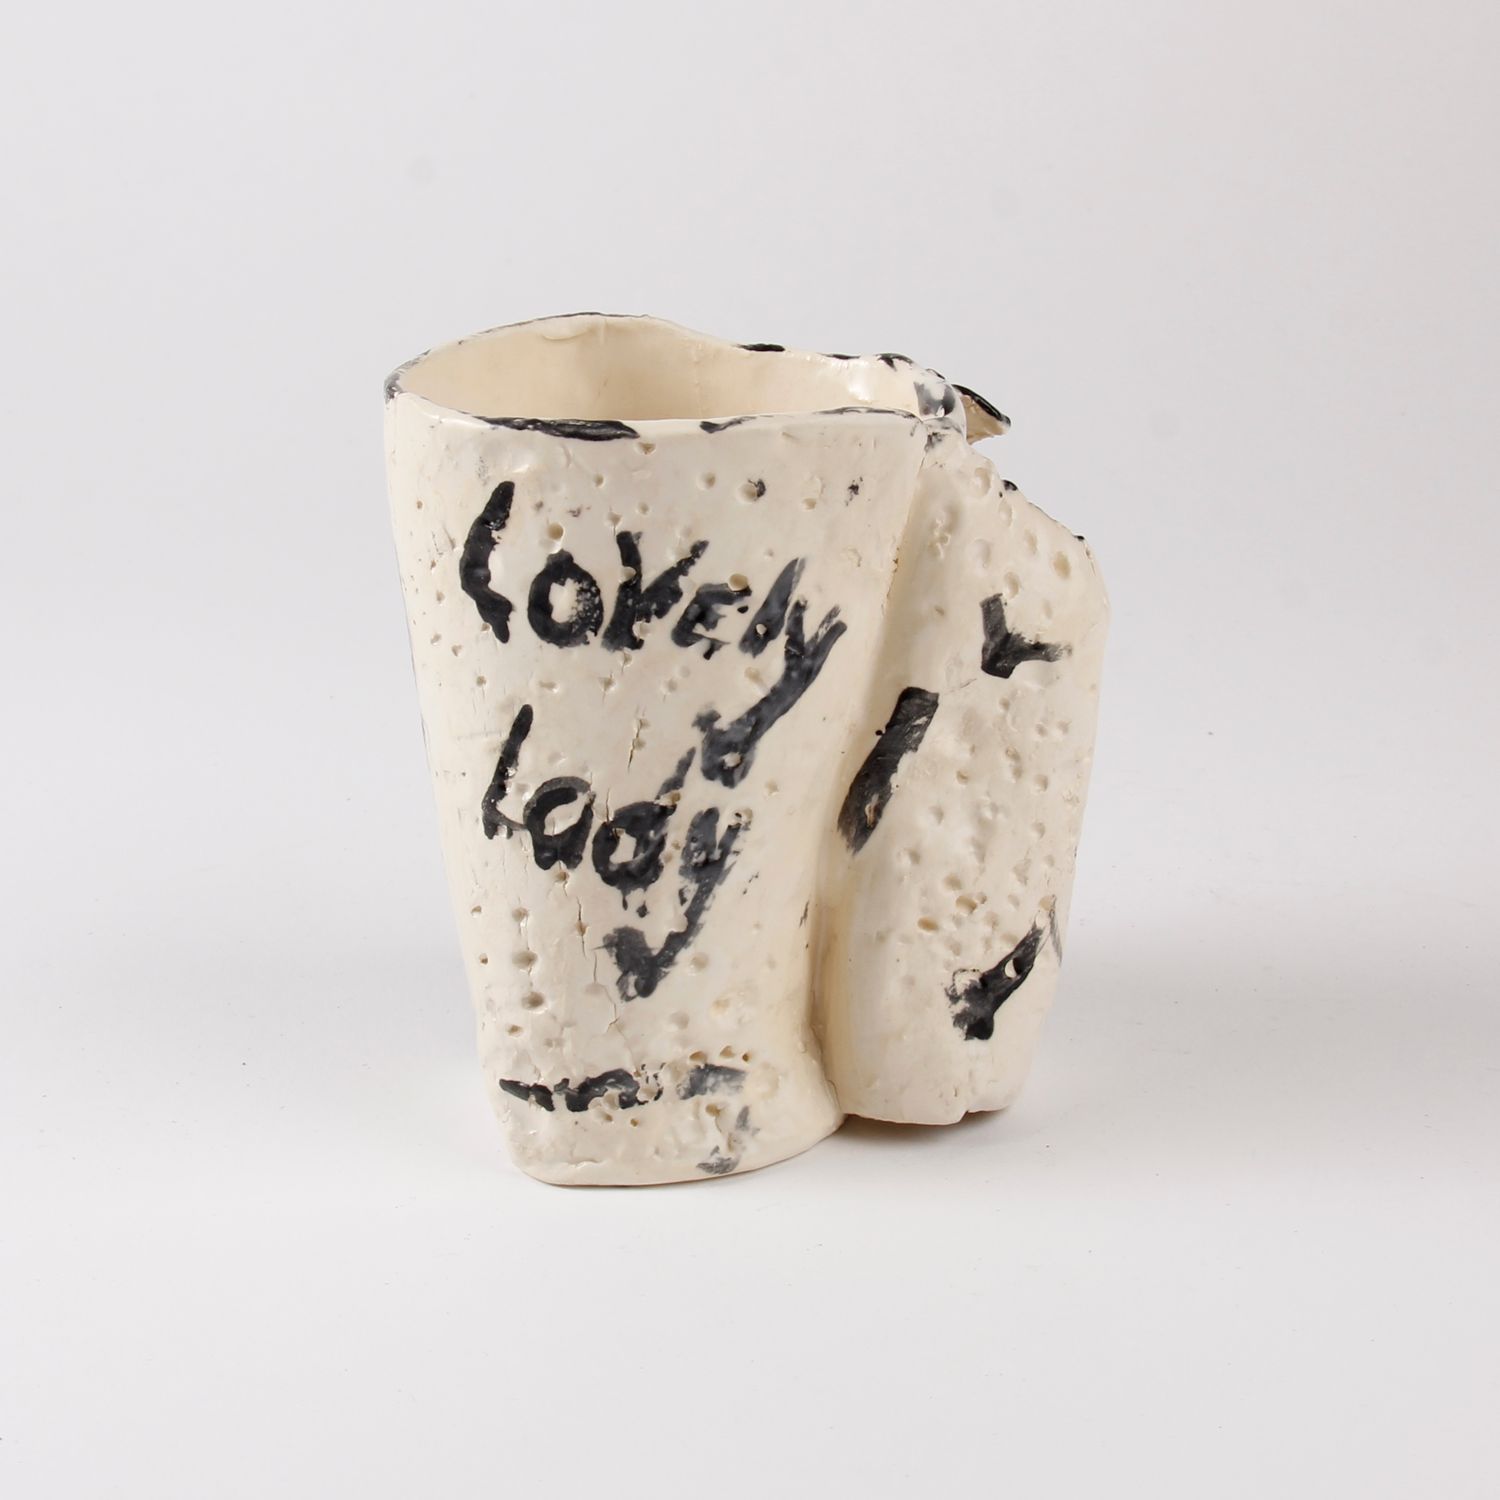 Patricia Lazar: Curly Handle Mug with Lady Product Image 3 of 3